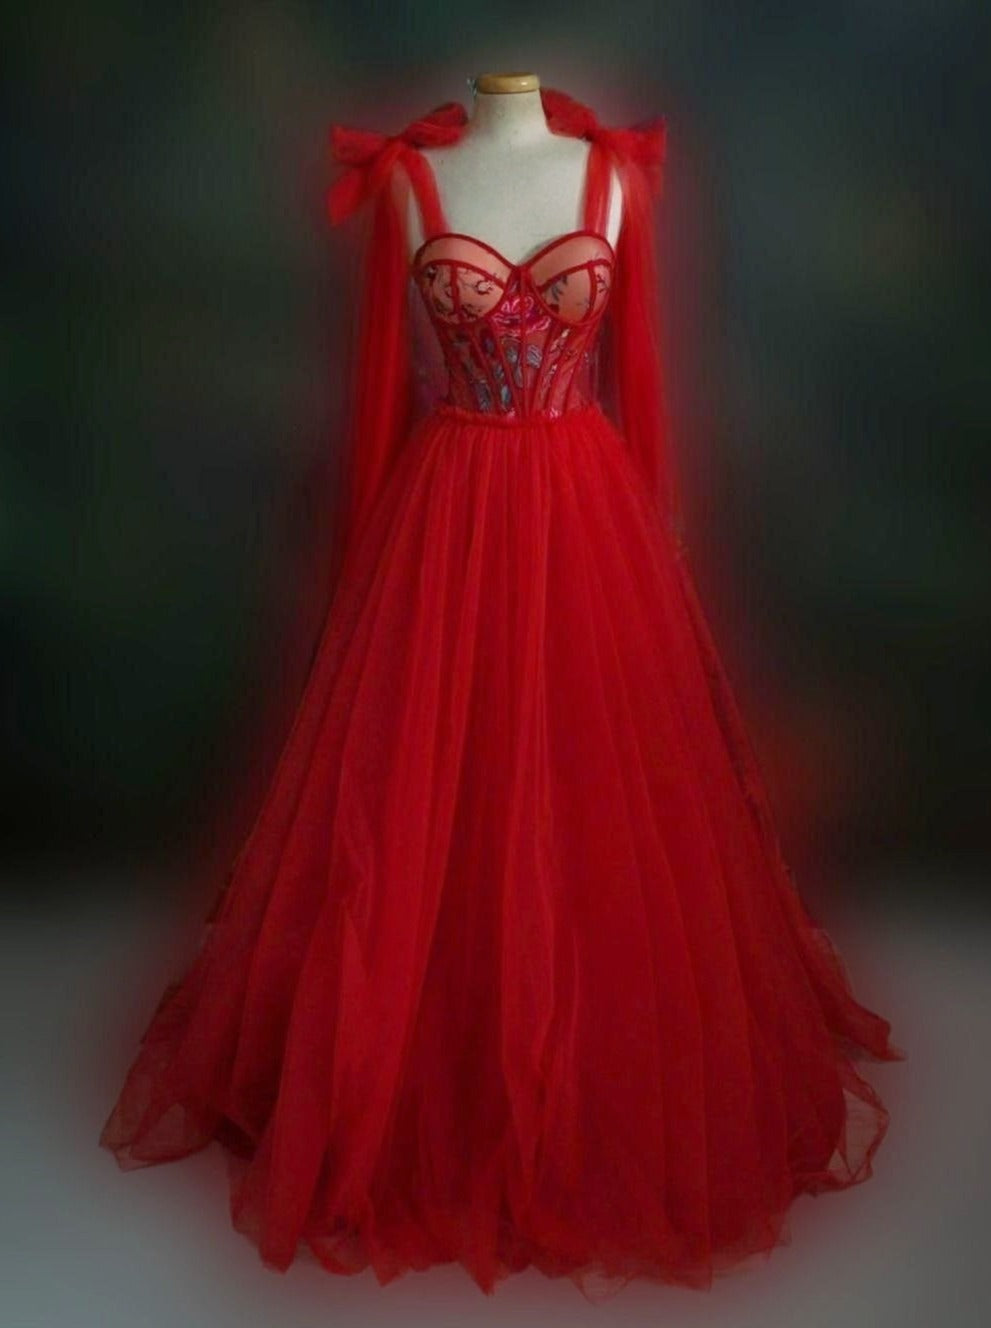 HOPE Formal Couture Dress